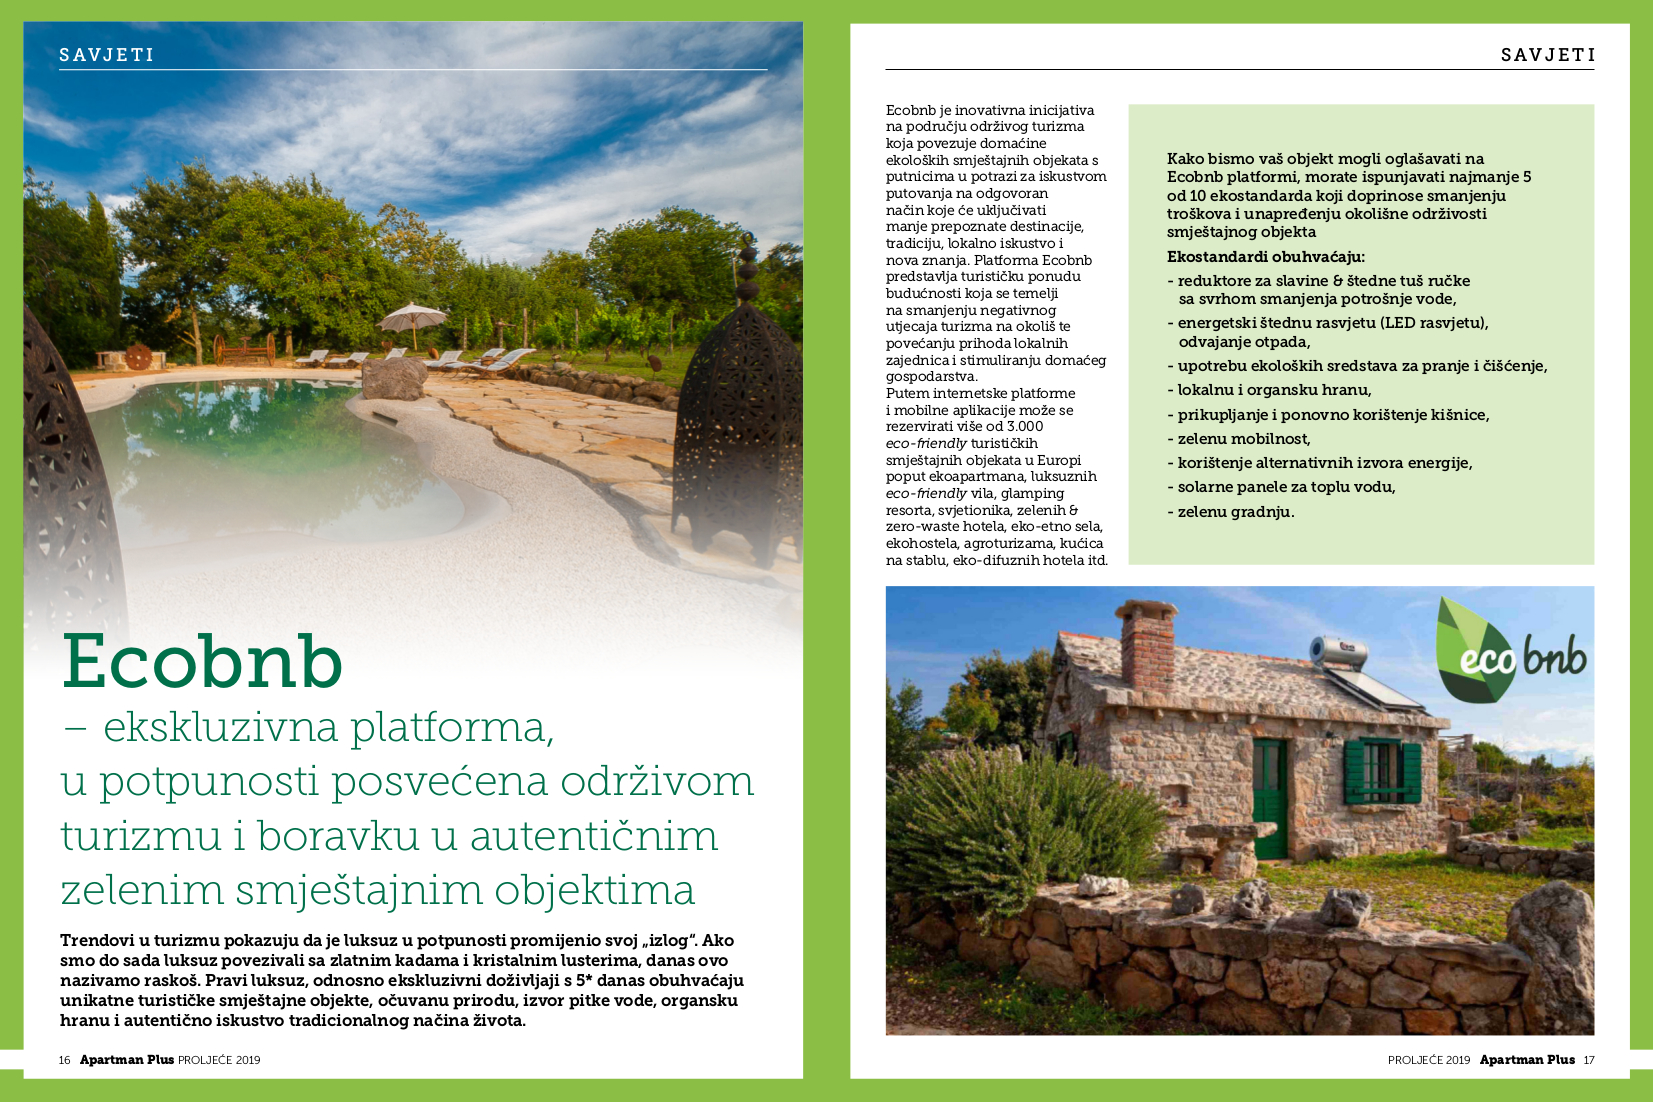 The article about Ecobnb, published on the Croatian magazine Apartman Plus